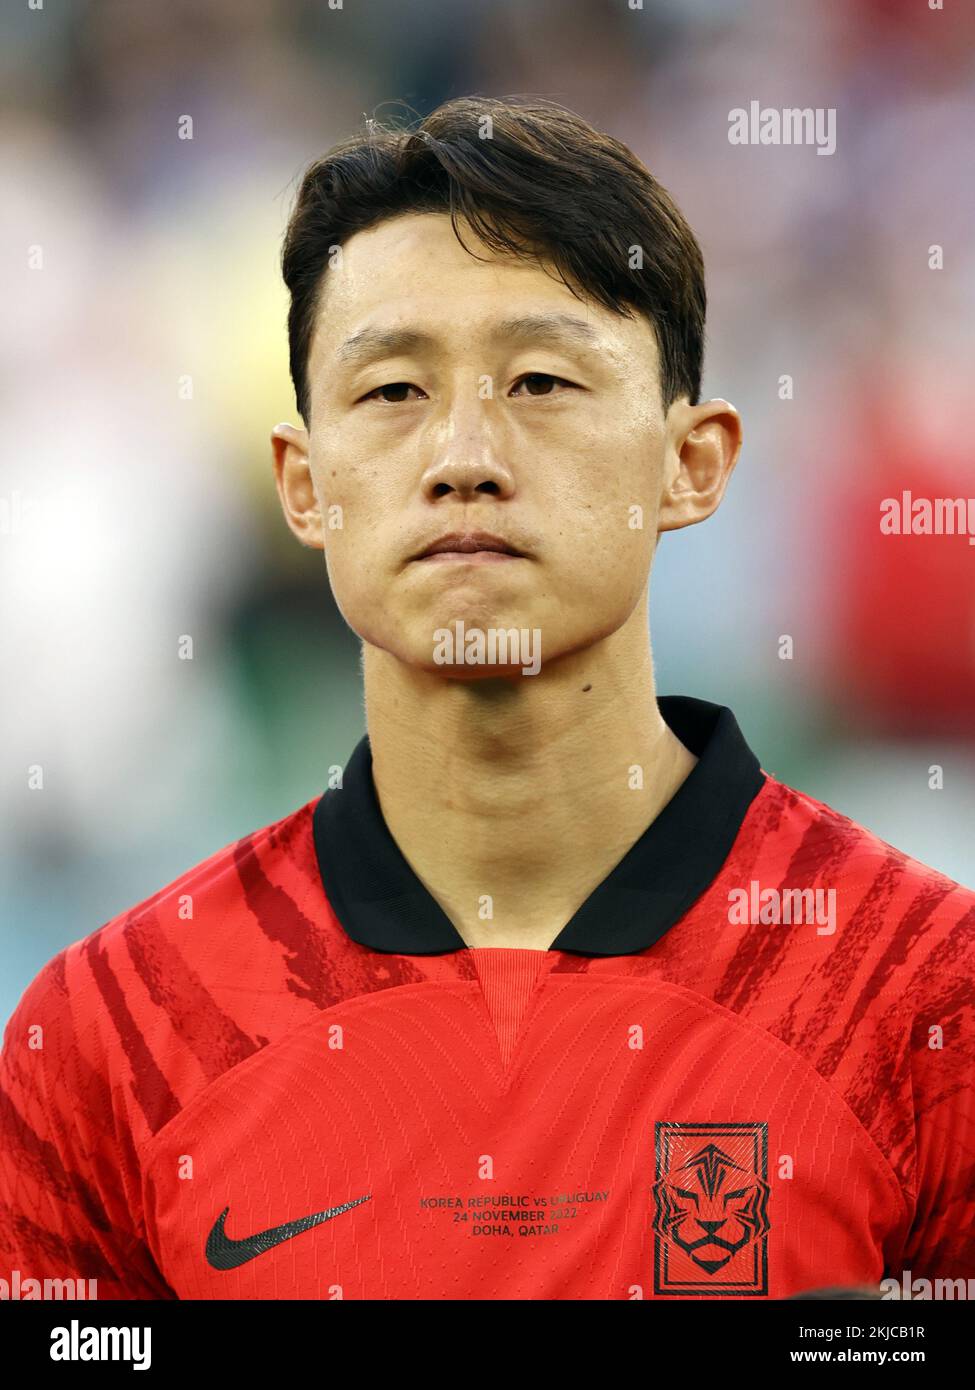 DOHA - Jae-sung Lee of Korea Republic during the FIFA World Cup Qatar 2022 group H match between Uruguay and South Korea at Education City Stadium on November 24, 2022 in Doha, Qatar. AP | Dutch Height | MAURICE OF STONE Credit: ANP/Alamy Live News Stock Photo